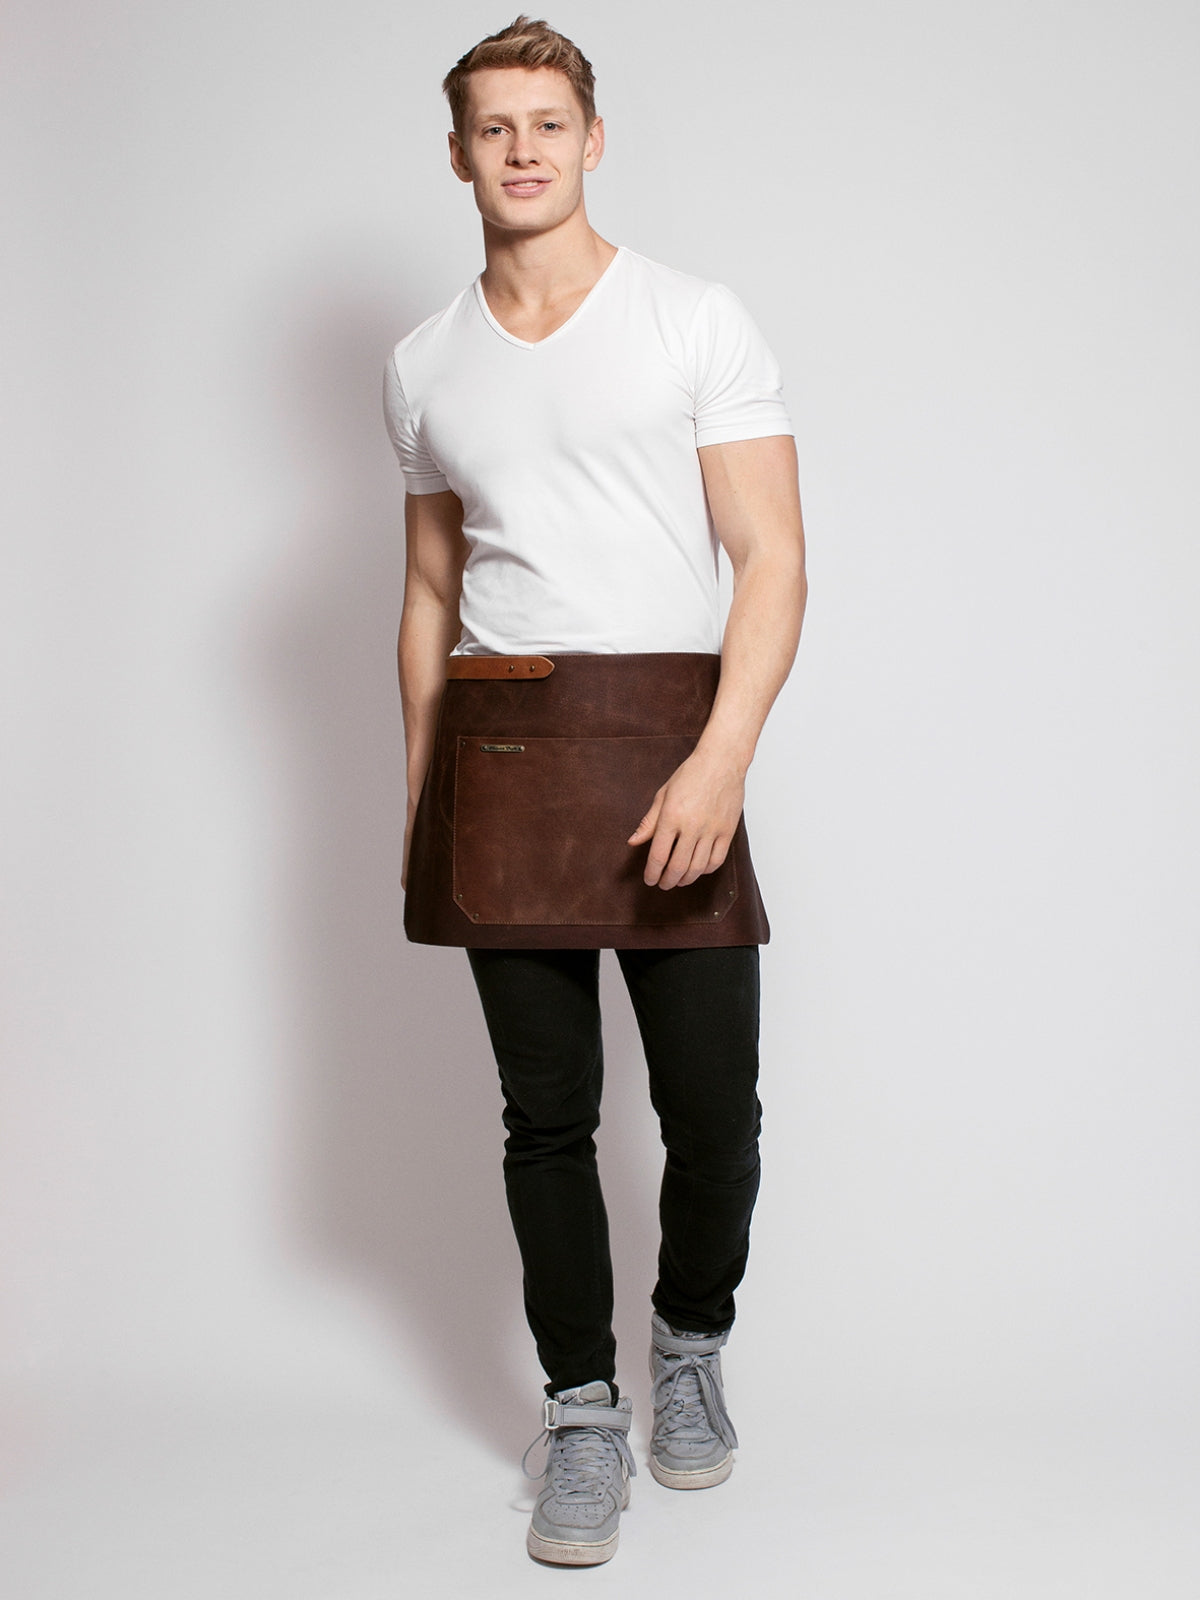 Leather Waist Apron Rustic Brown by STW -  ChefsCotton